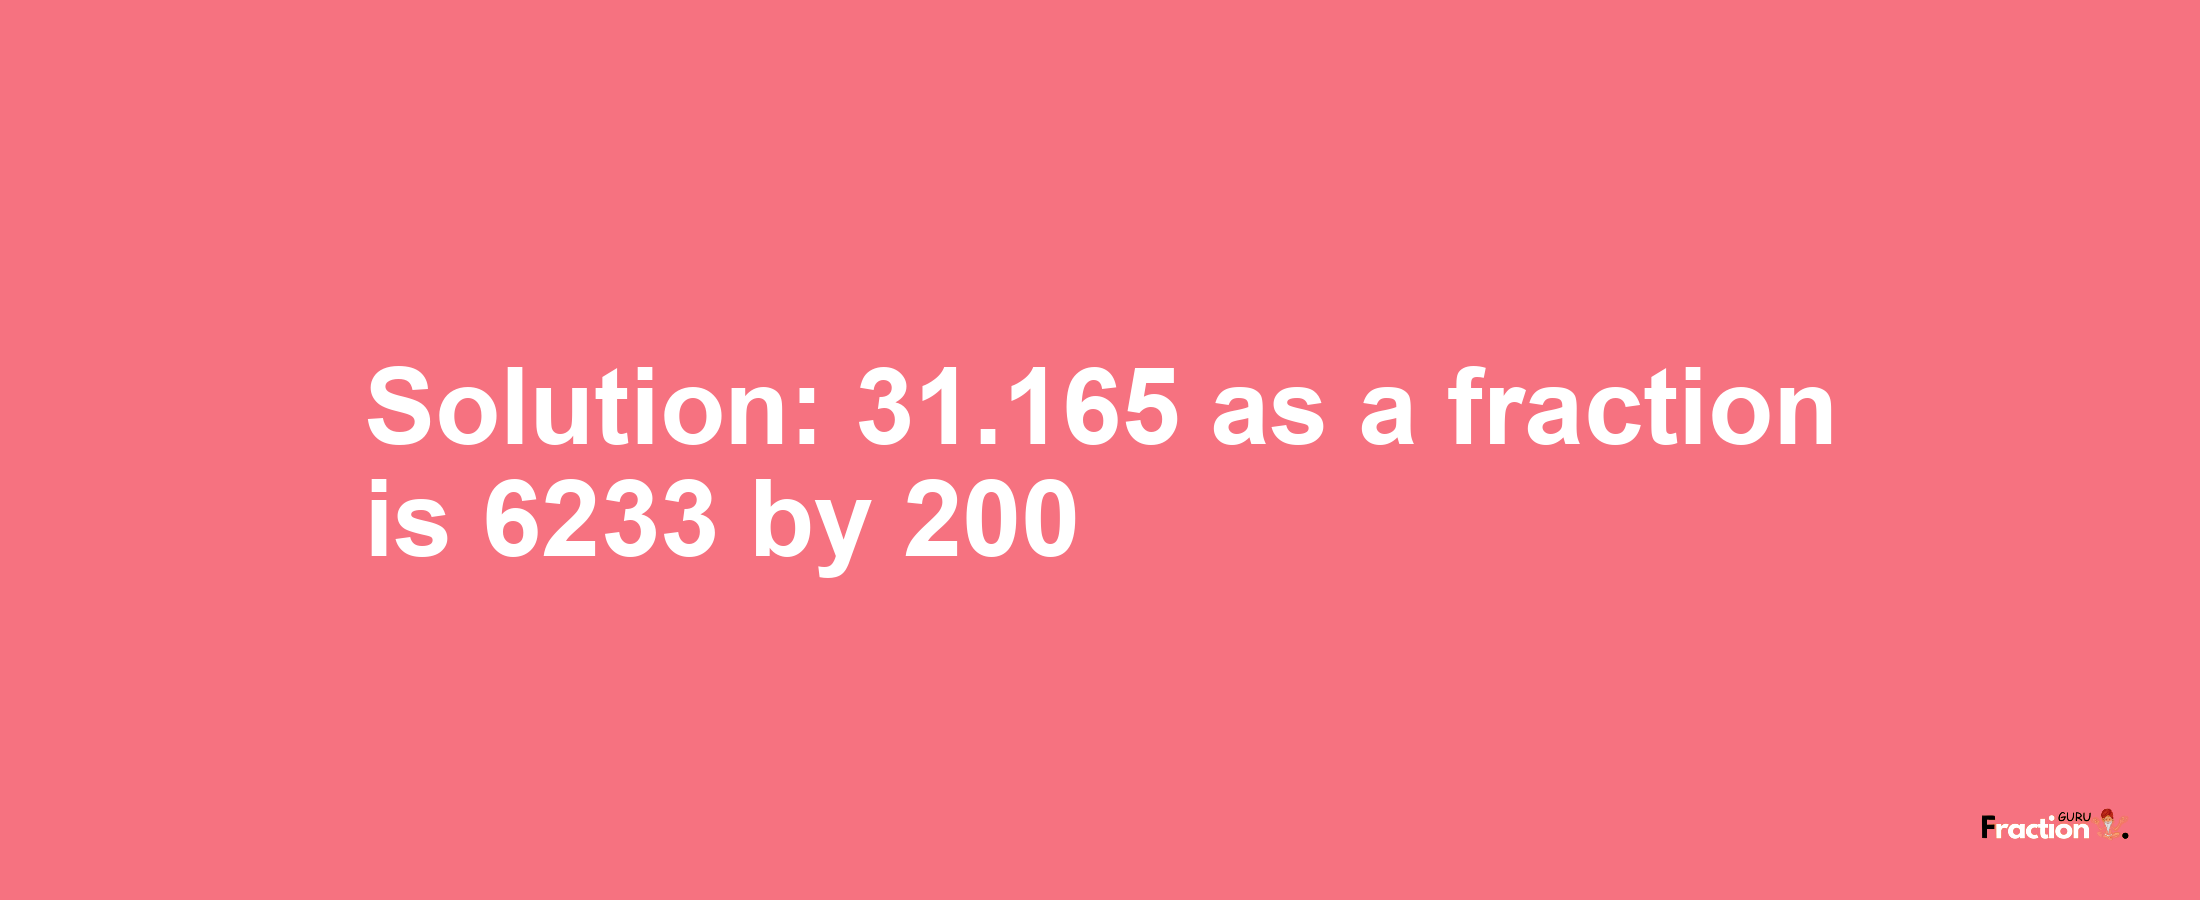 Solution:31.165 as a fraction is 6233/200